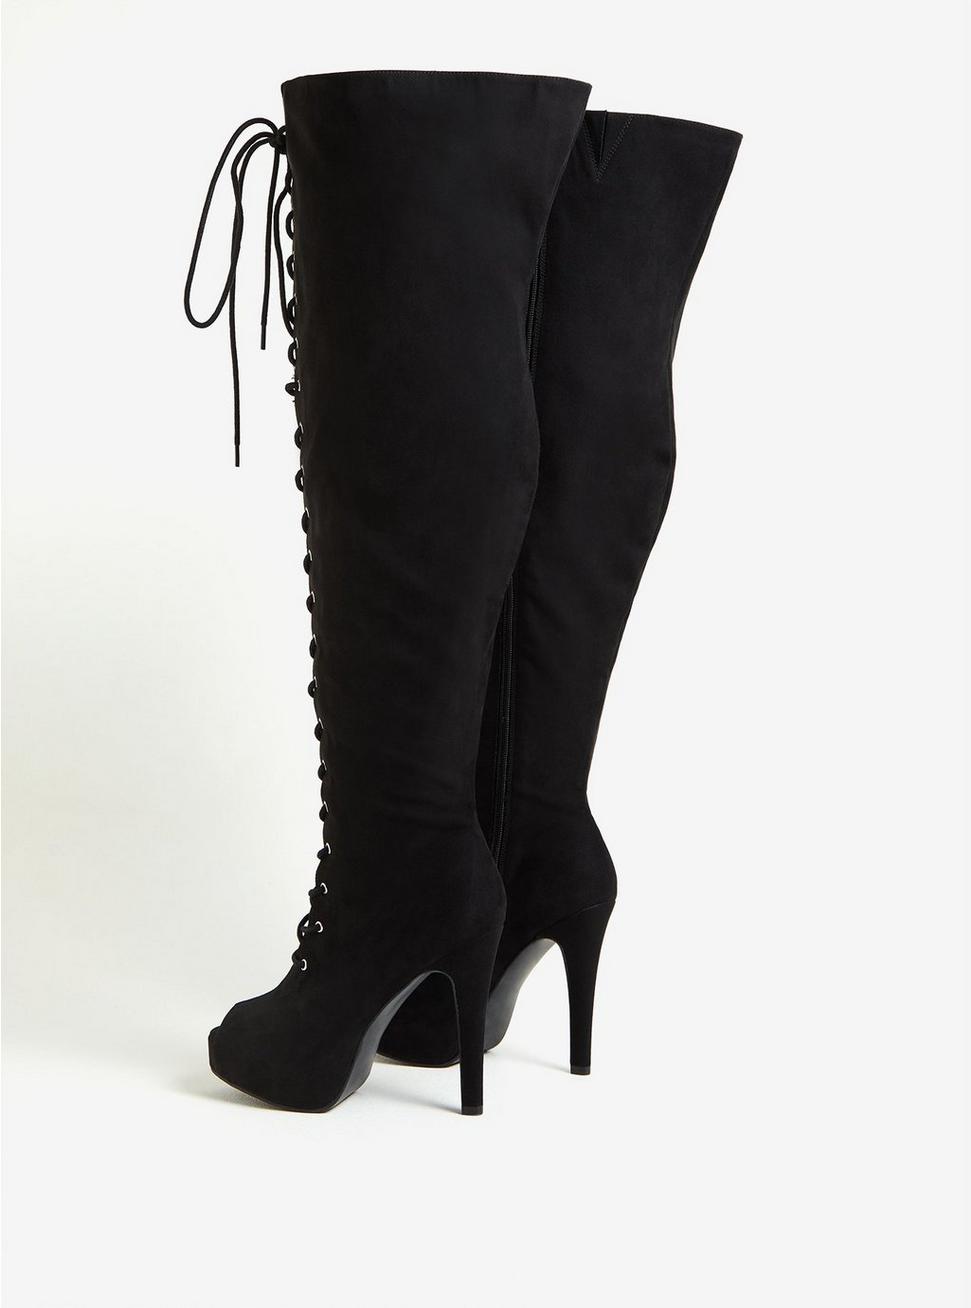 Open Toe Lace-Up Over-The-Knee Platform Boot - Black Faux Suede (WW), BLACK, alternate